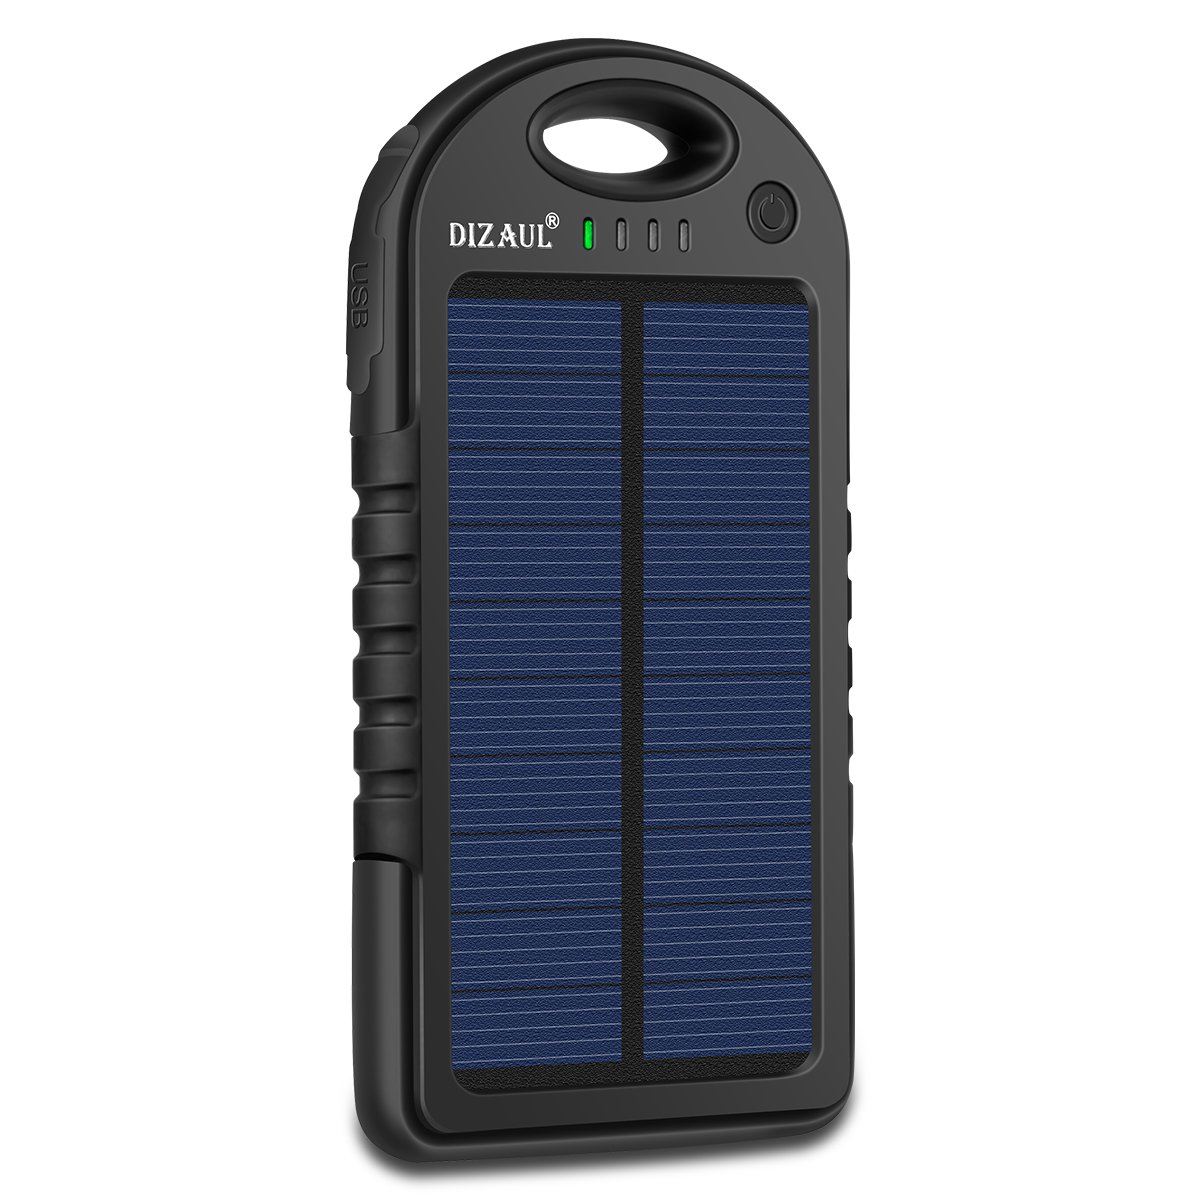 Portable Solar Power Bank - Waterproof/Shockproof Battery Bank for Cell Phone